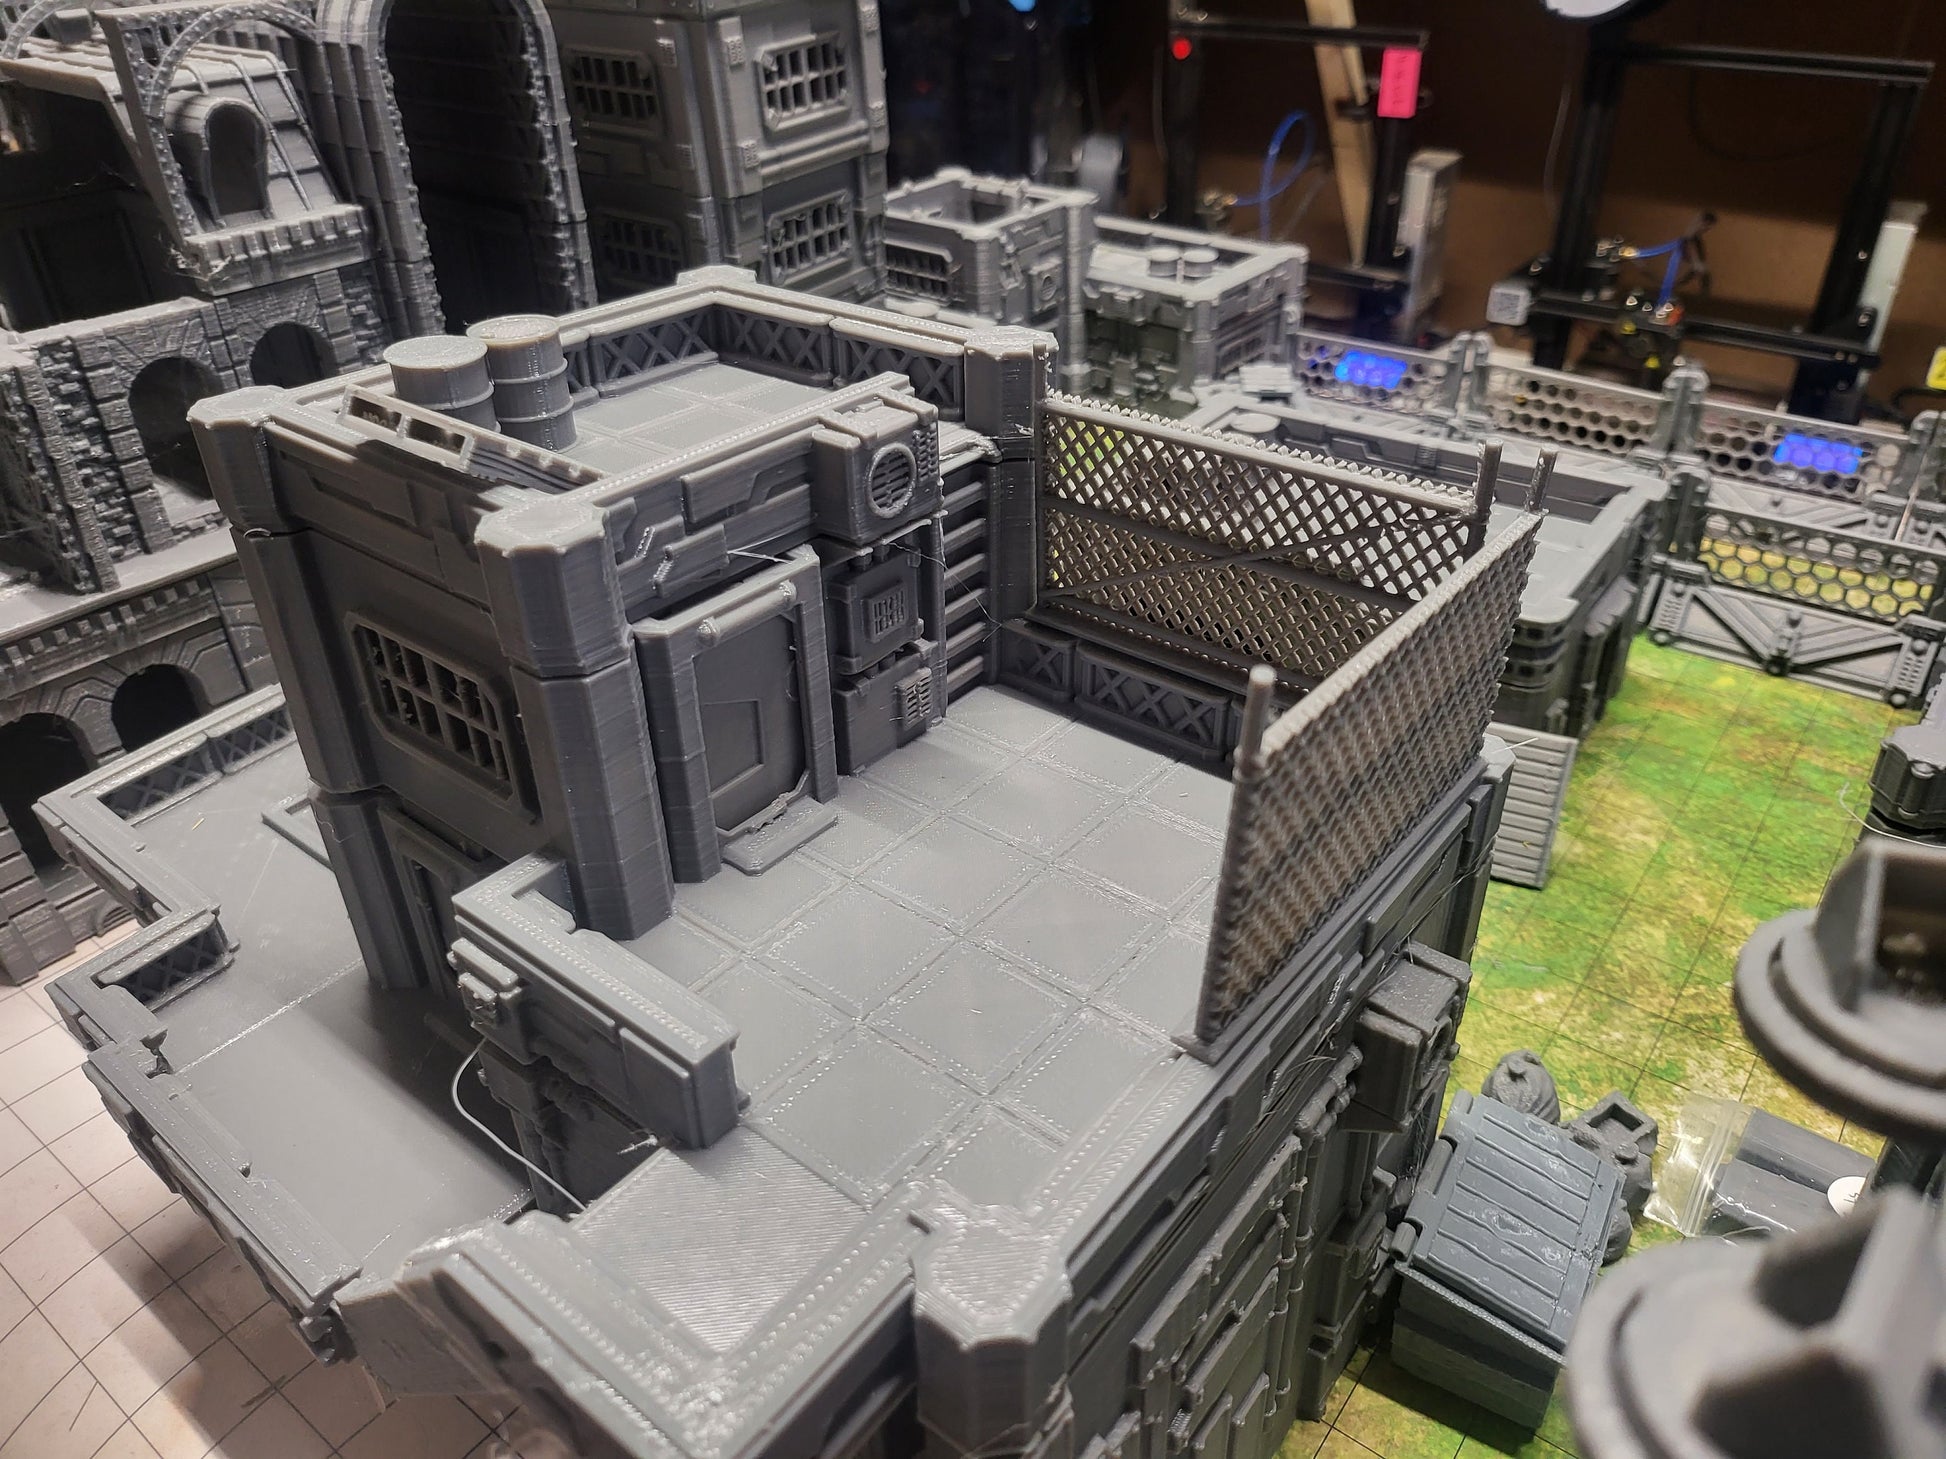 Neo City, command center, Building#3, communications hub, Relay Station, Warhammer, Industrial, Wargaming